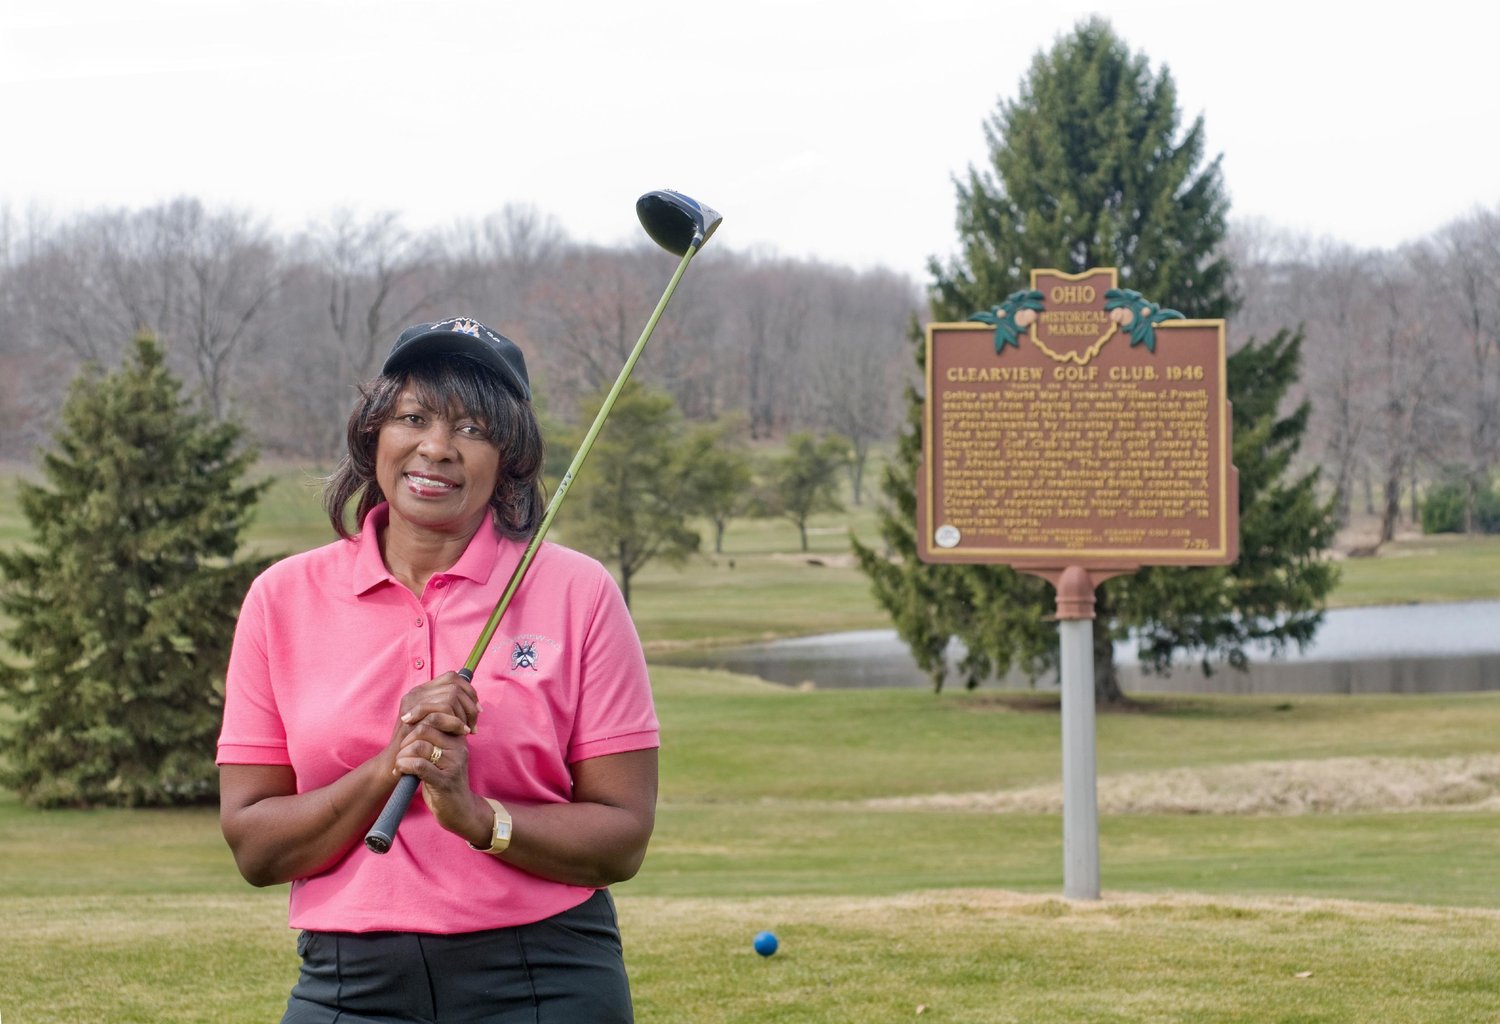 Renee’ Powell From East Canton is American Golf Royalty